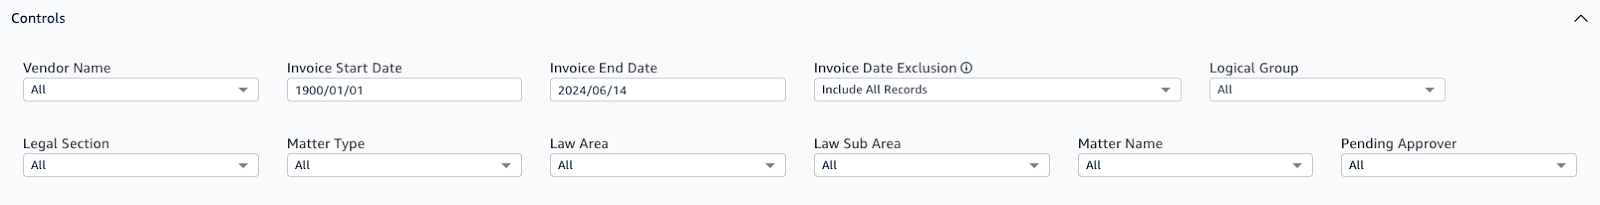 Image of control bar and Invoice metrics tab filters